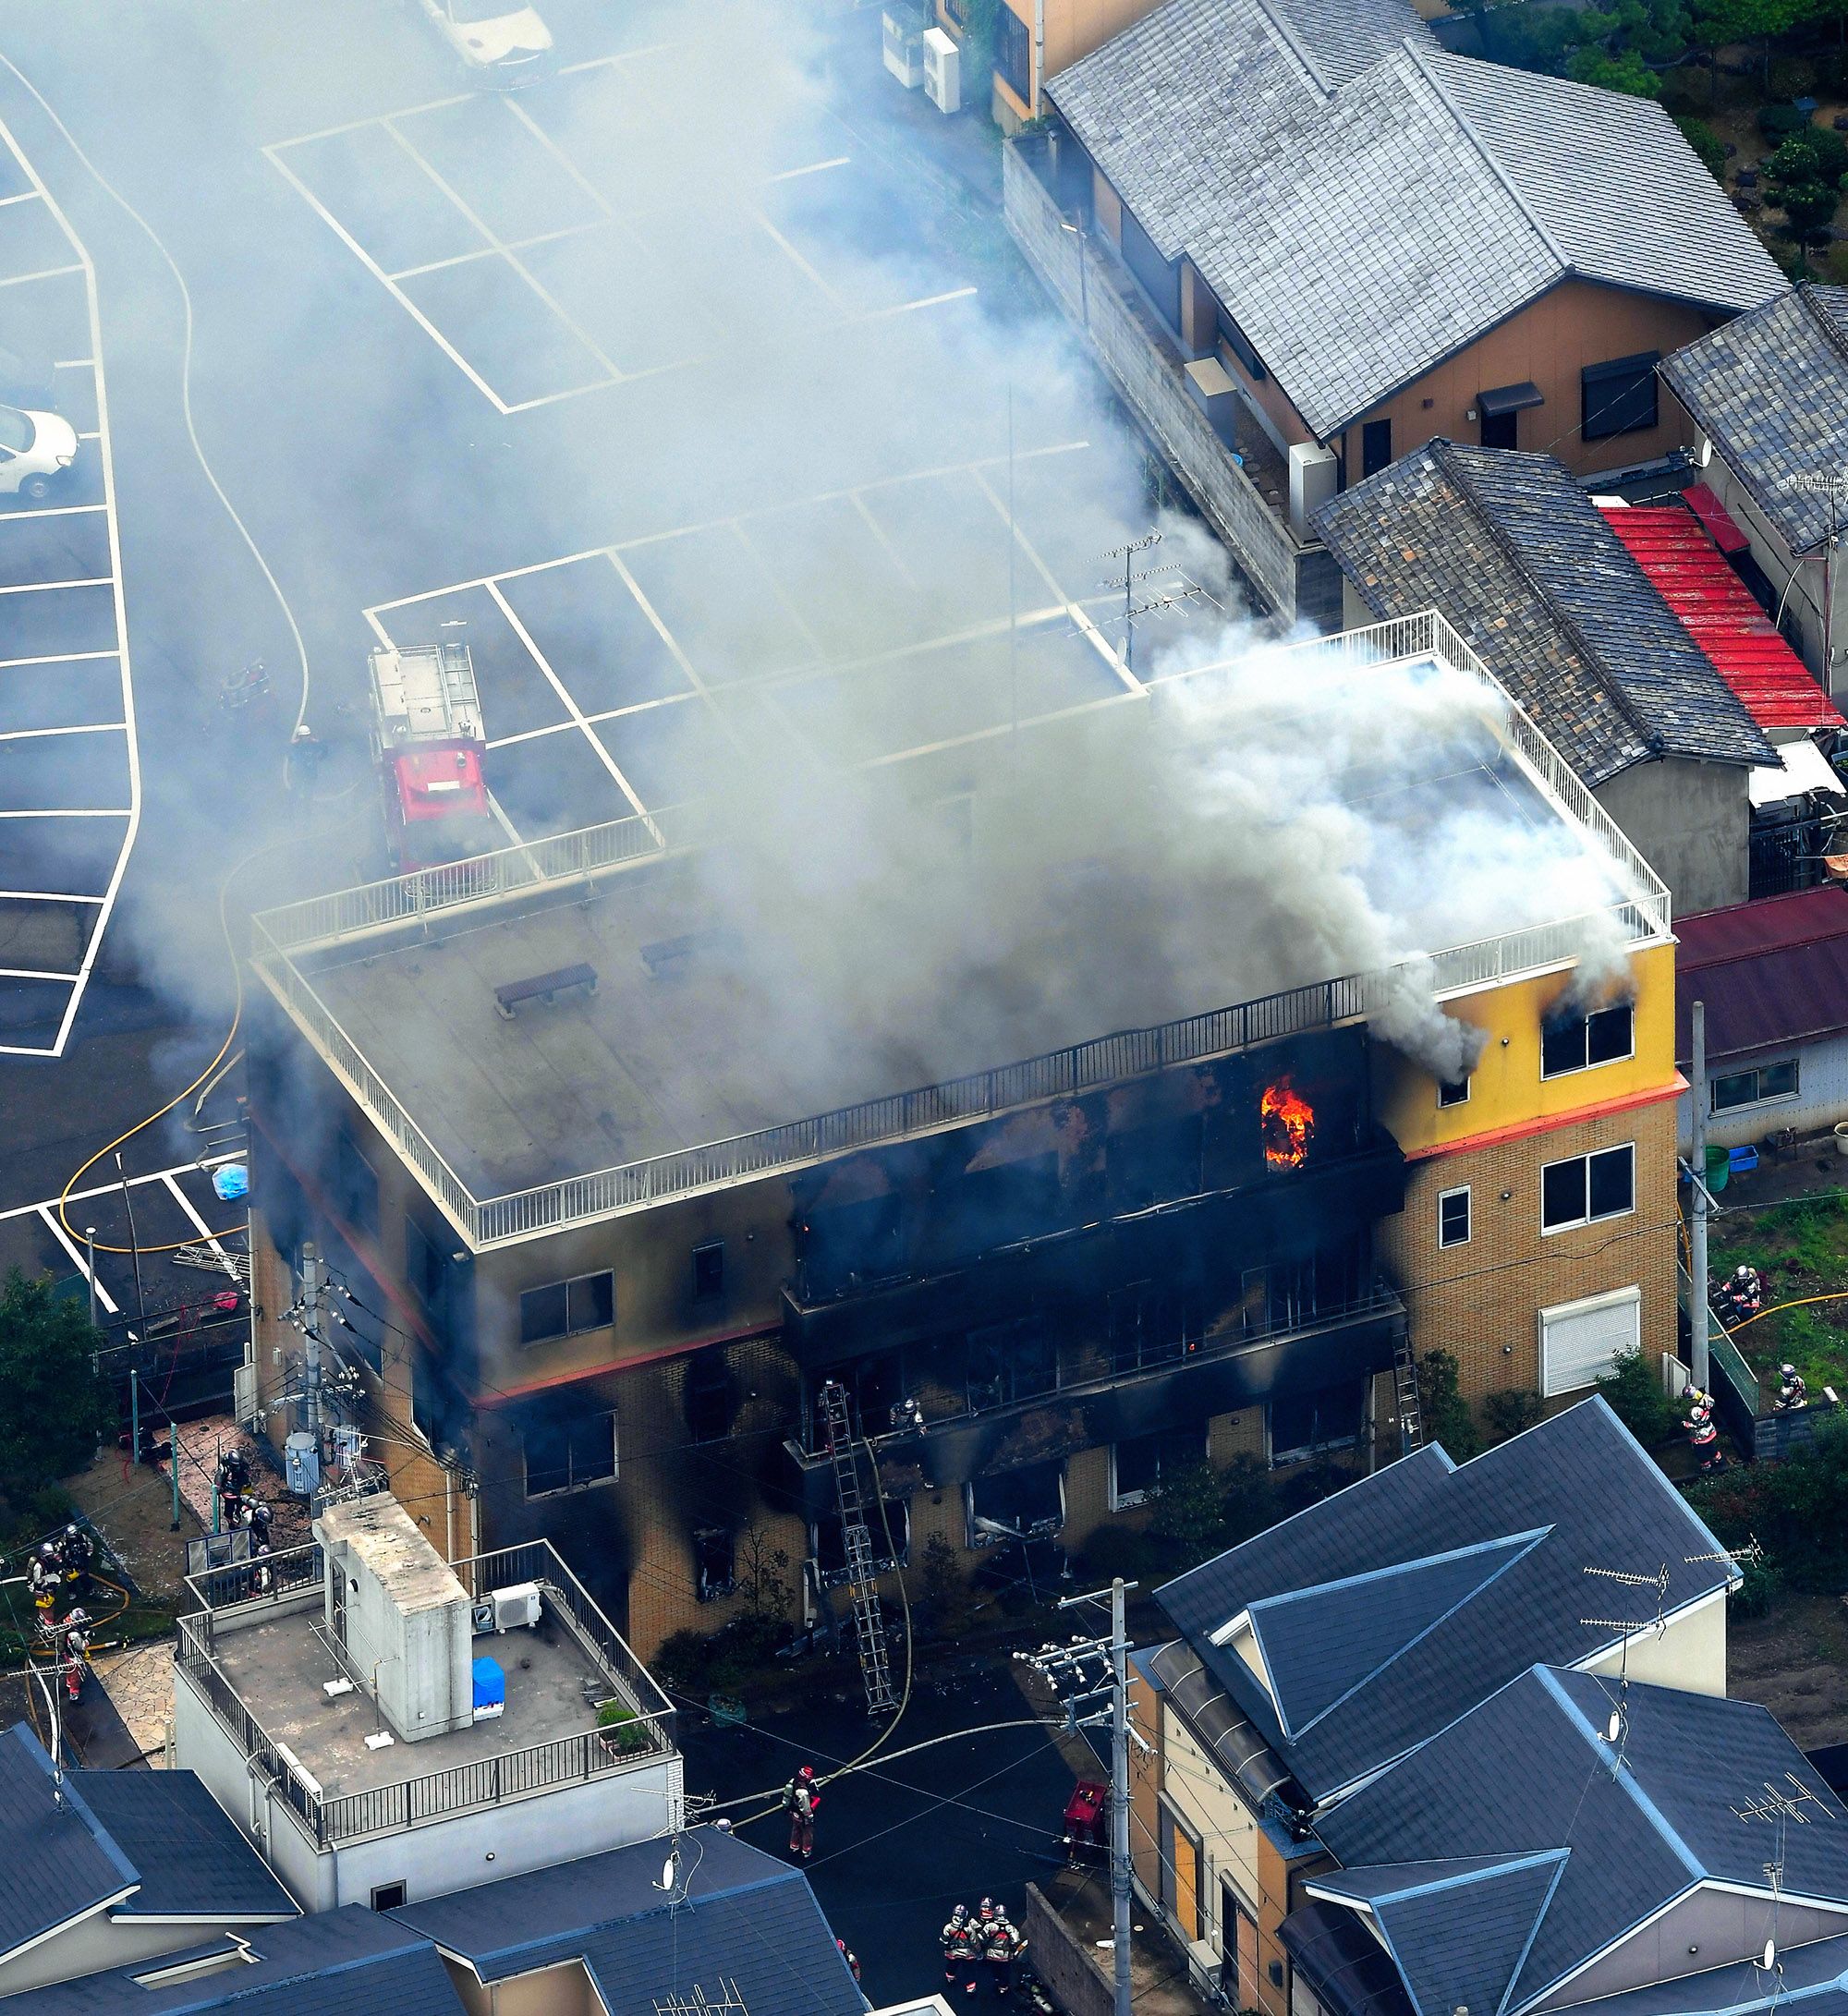 Will Kyoto Animation recover after the arson attack? - Quora